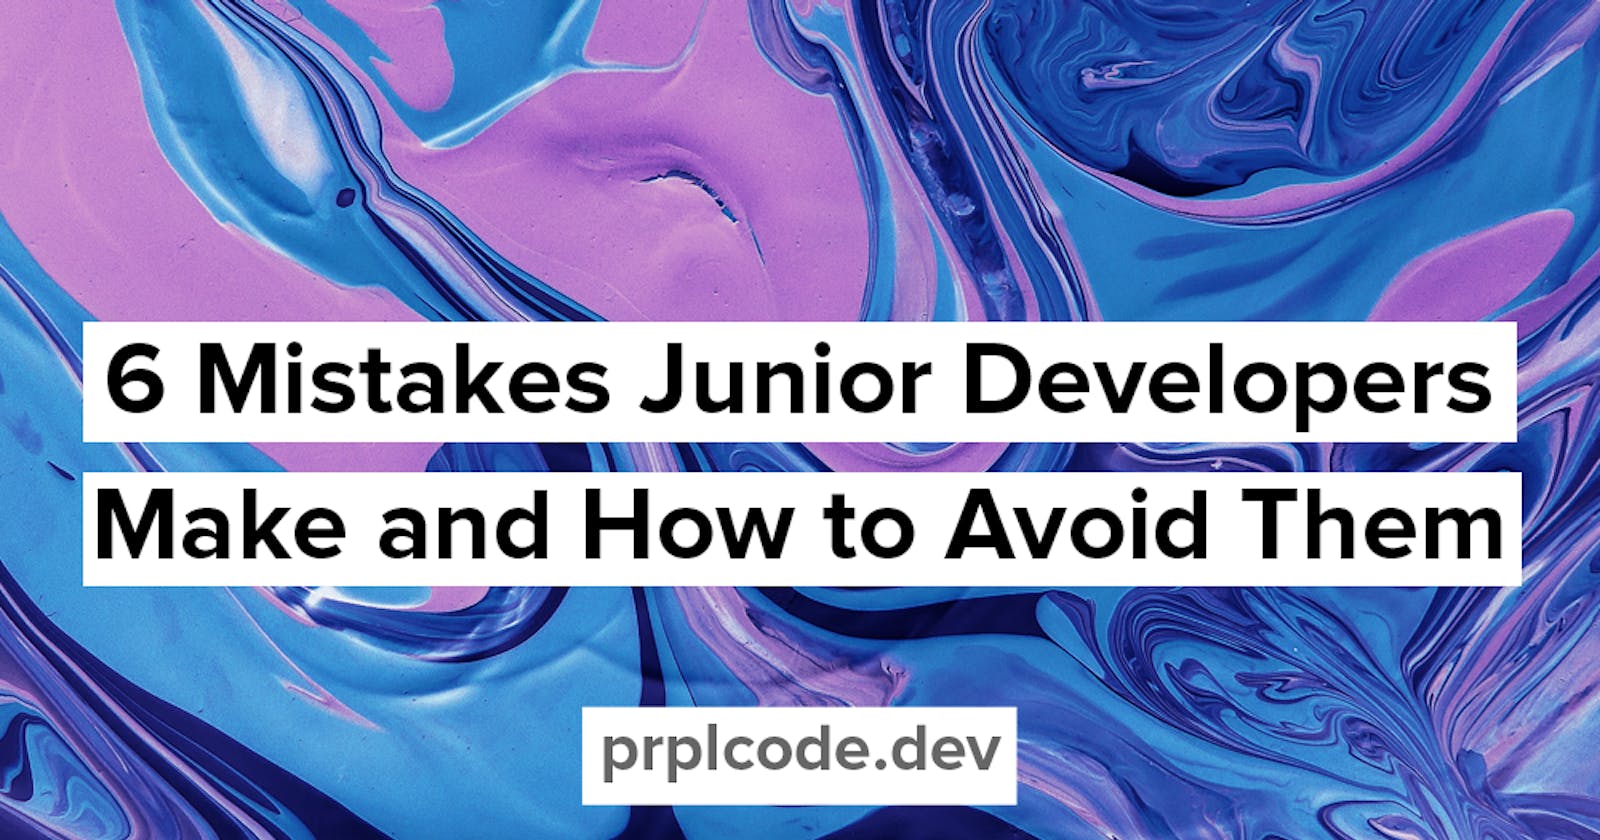 6 Mistakes Junior Developers Make and How to Avoid Them